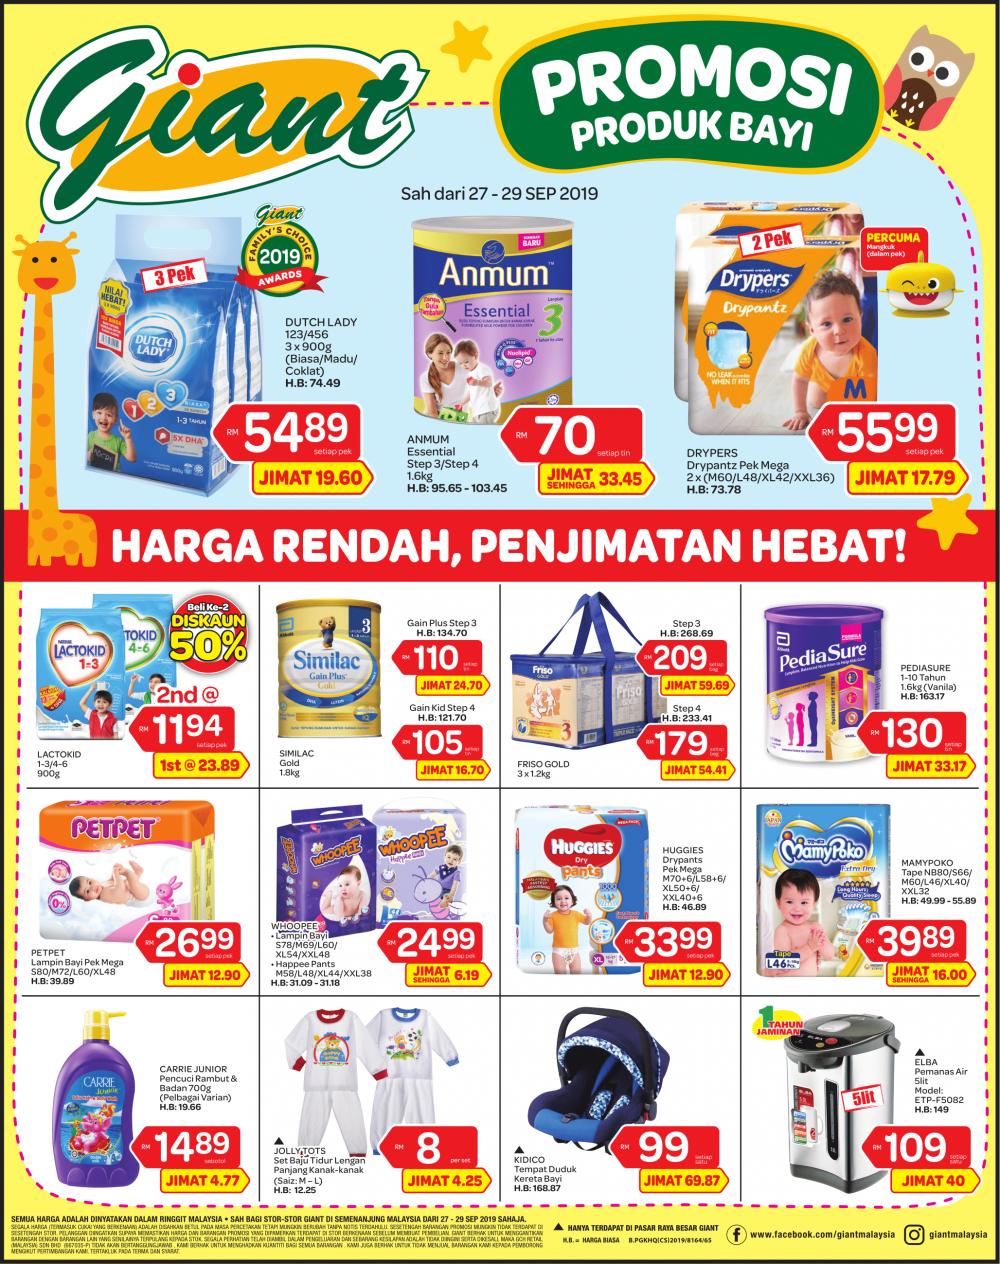 Giant Baby Products Promotion (27 September 2019 - 29 September 2019)